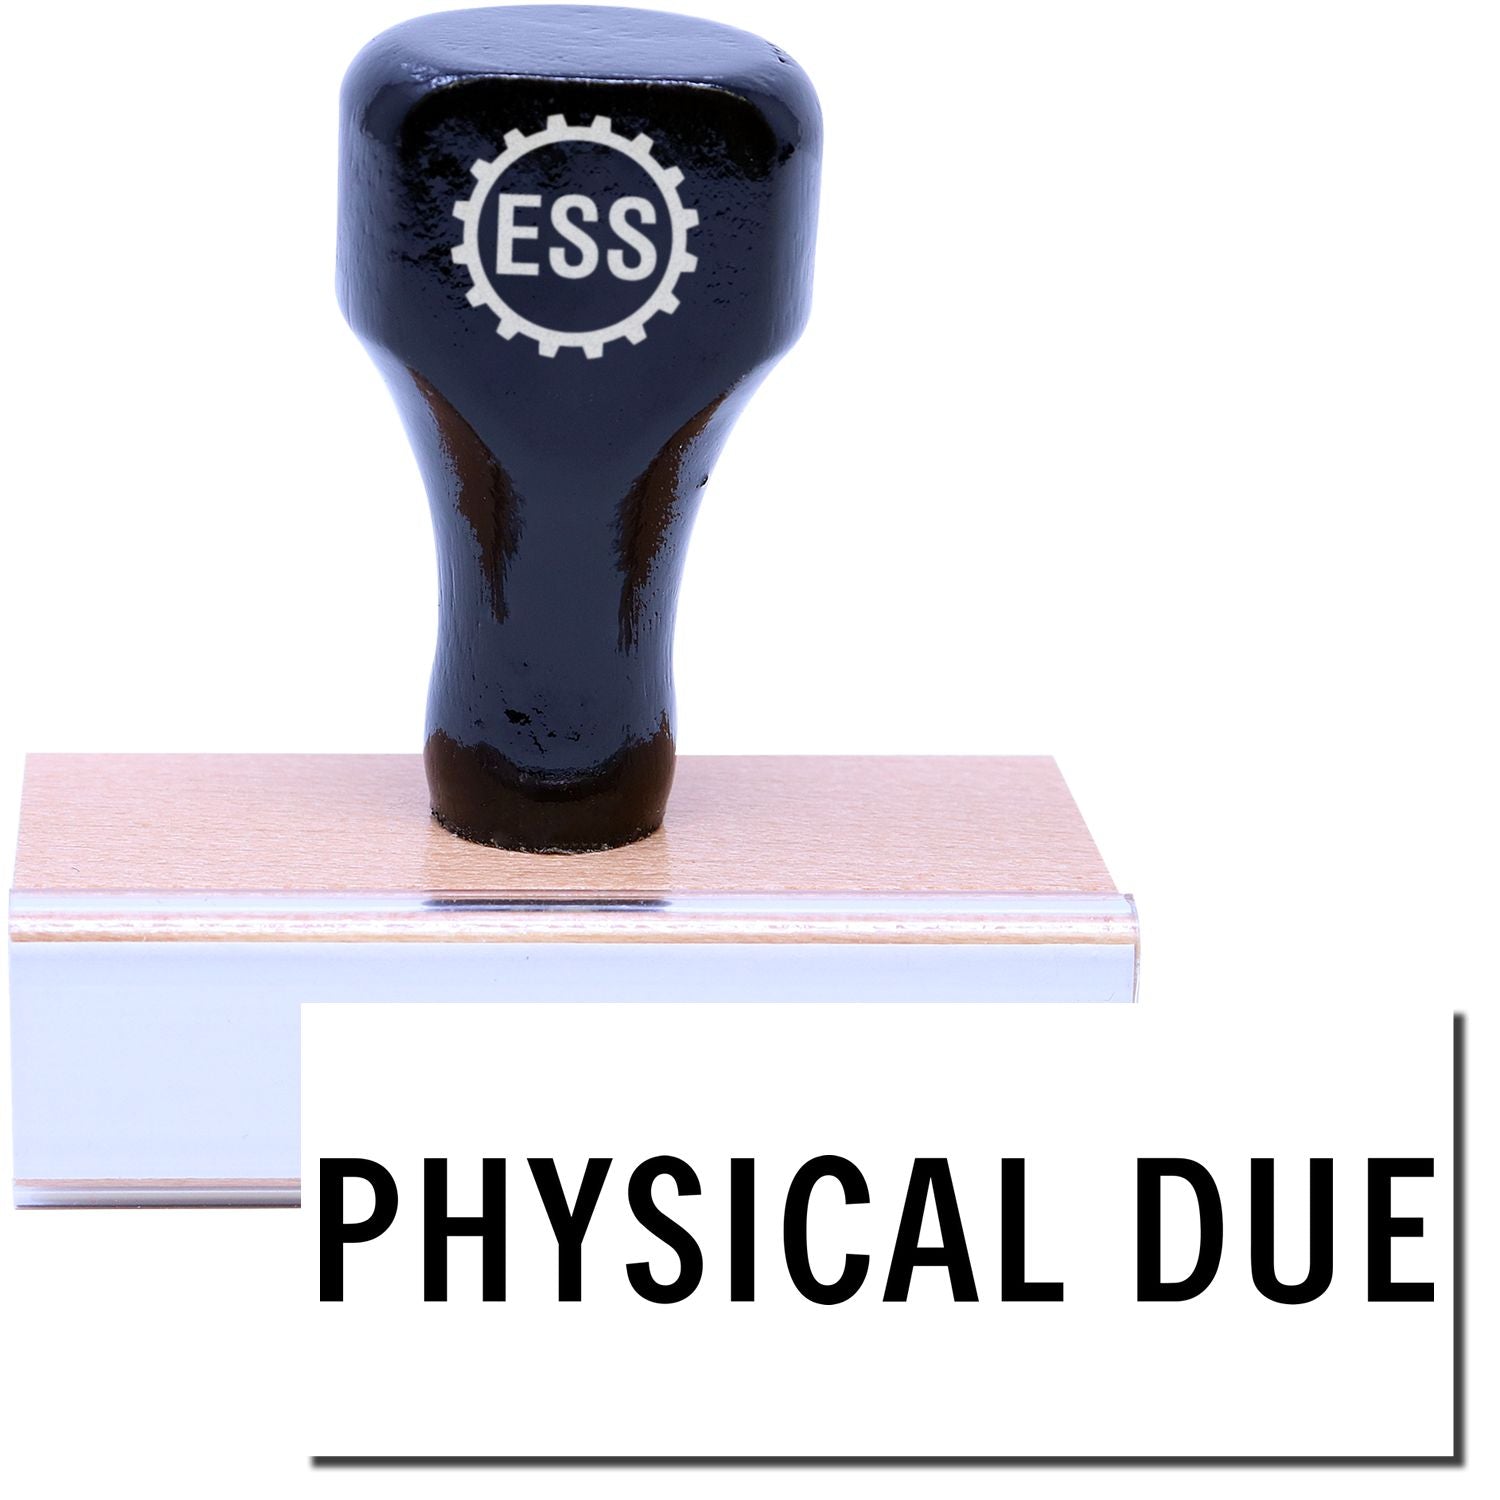 A stock office rubber stamp with a stamped image showing how the text "PHYSICAL DUE" is displayed after stamping.